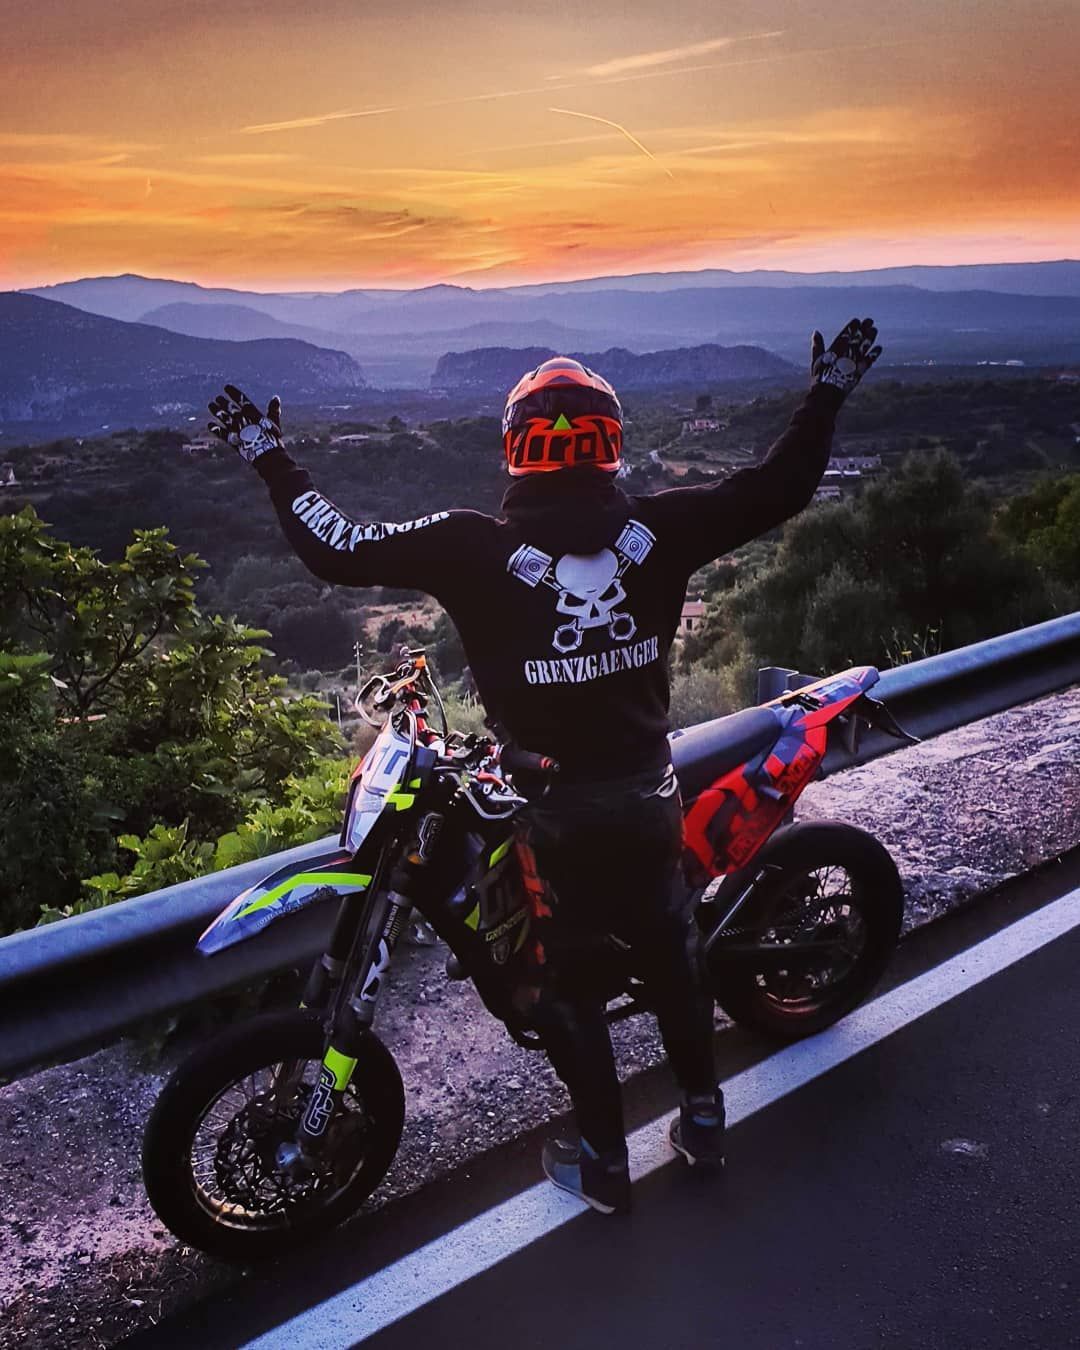 querly. GRENZGAENGER on Instagram: “Describe Supermoto with 1 word!